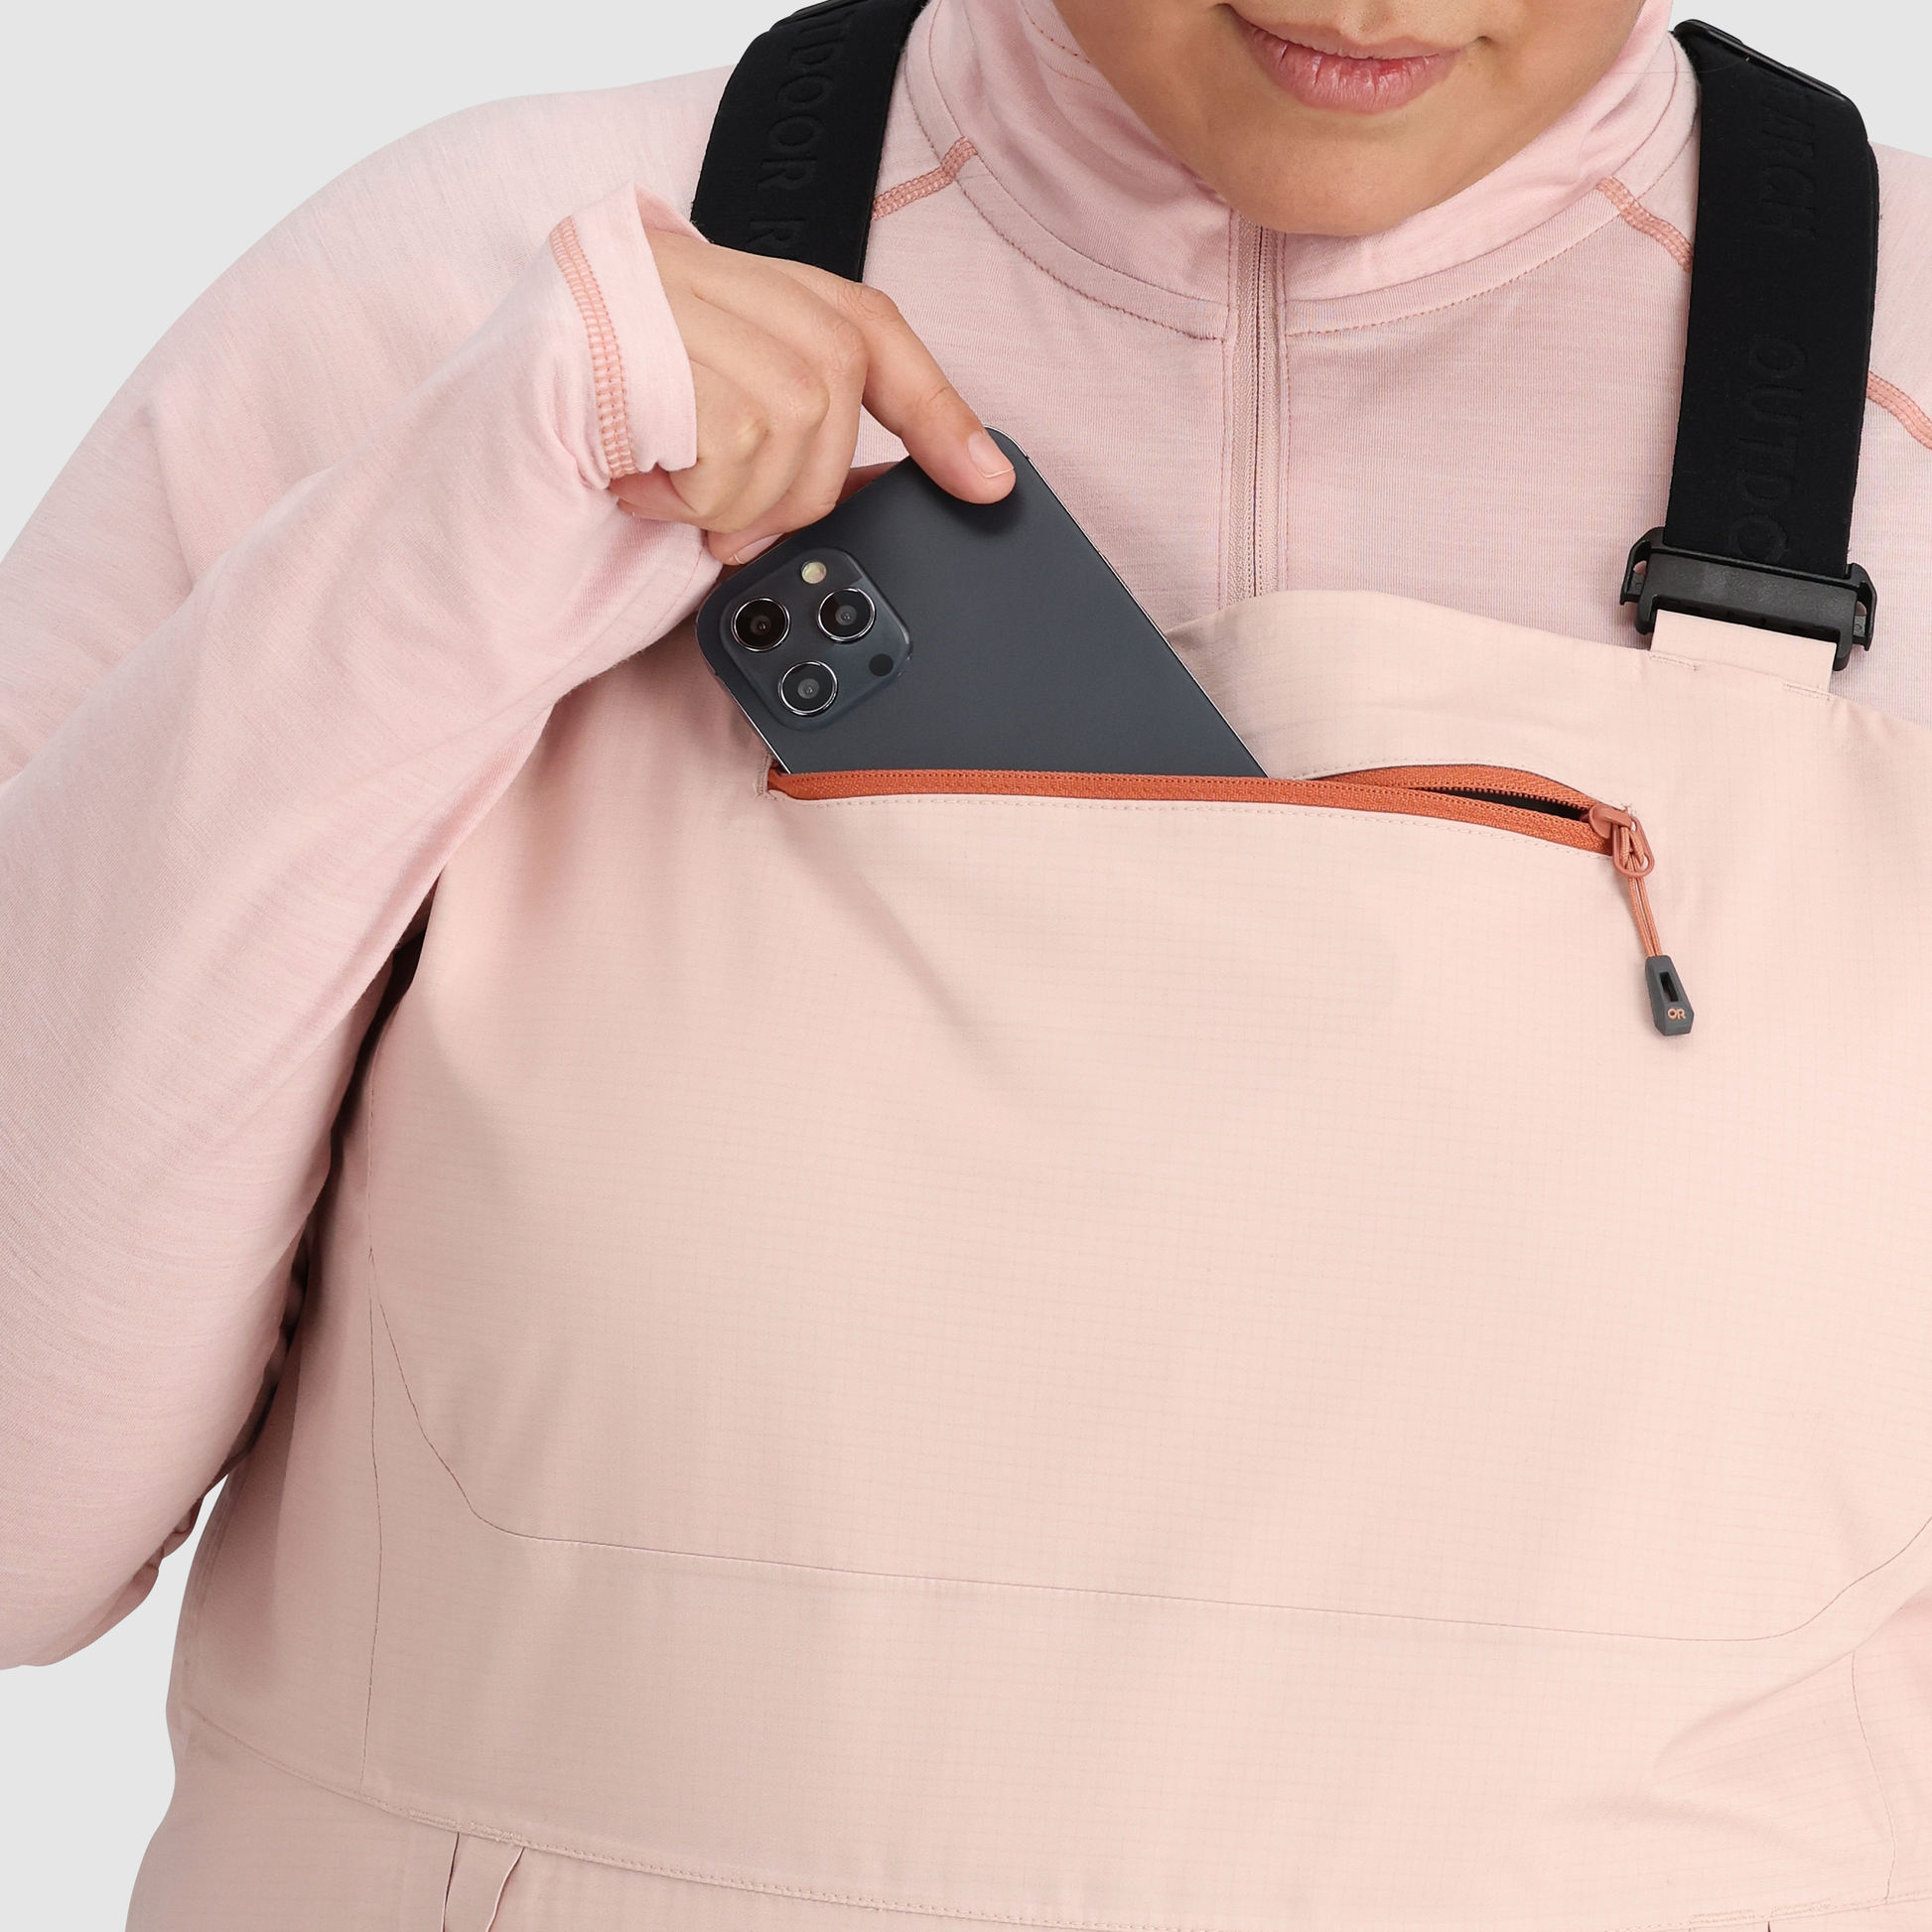 B3 :: Center Front Zip / At-hand items stay within easy reach in this pocket, large enough for a pair of liner gloves and oriented to hold your phone safely and securely.